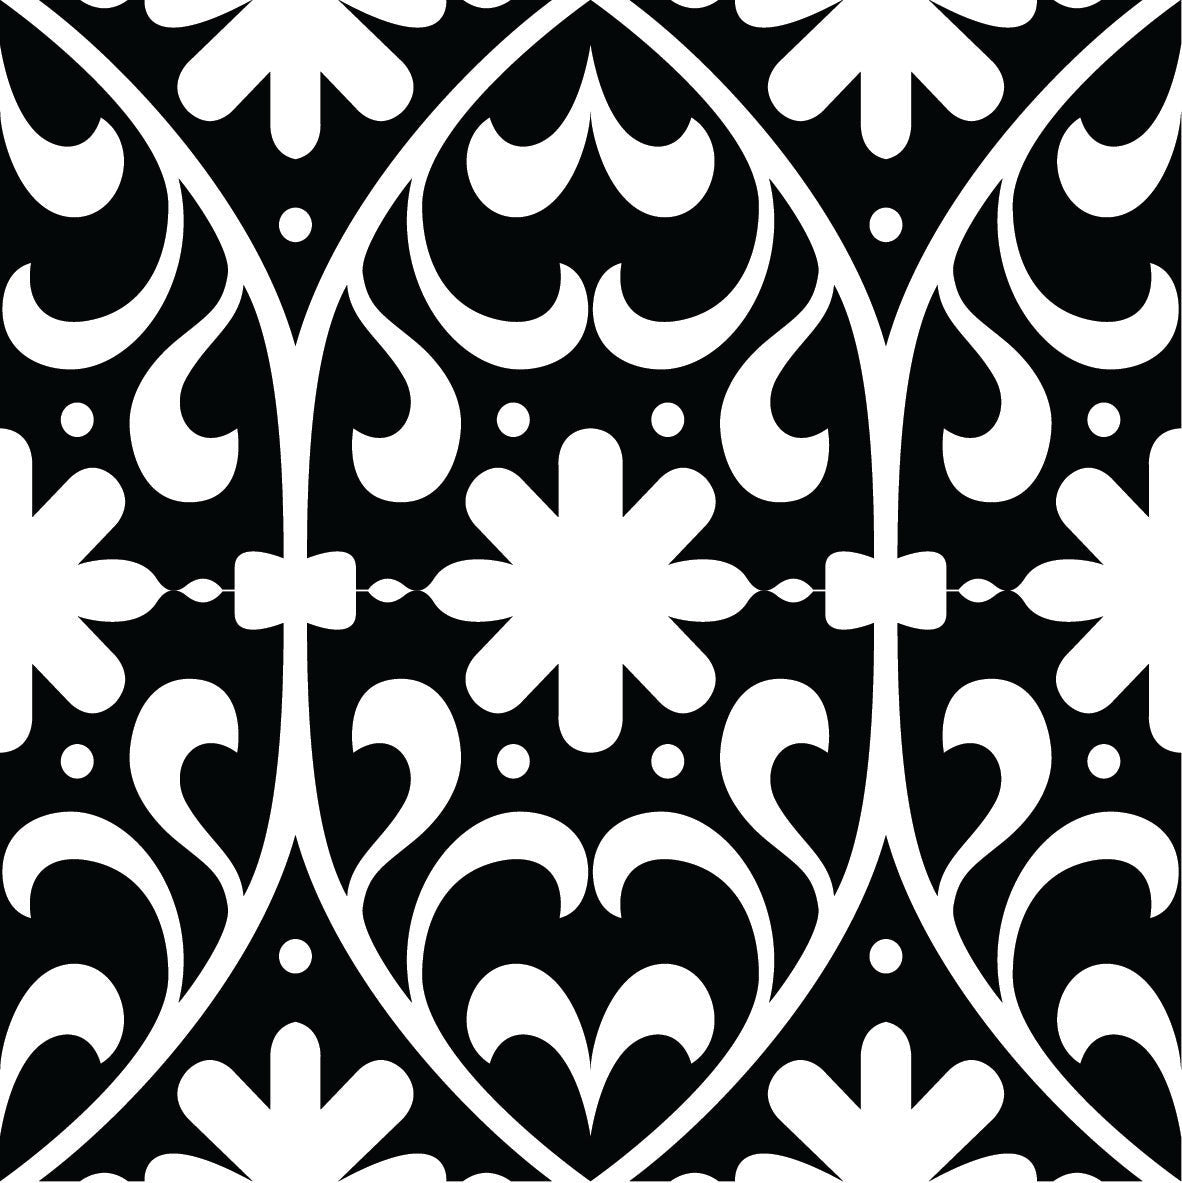 8" X 8" Black and White Floral Peel and Stick Removable Tiles